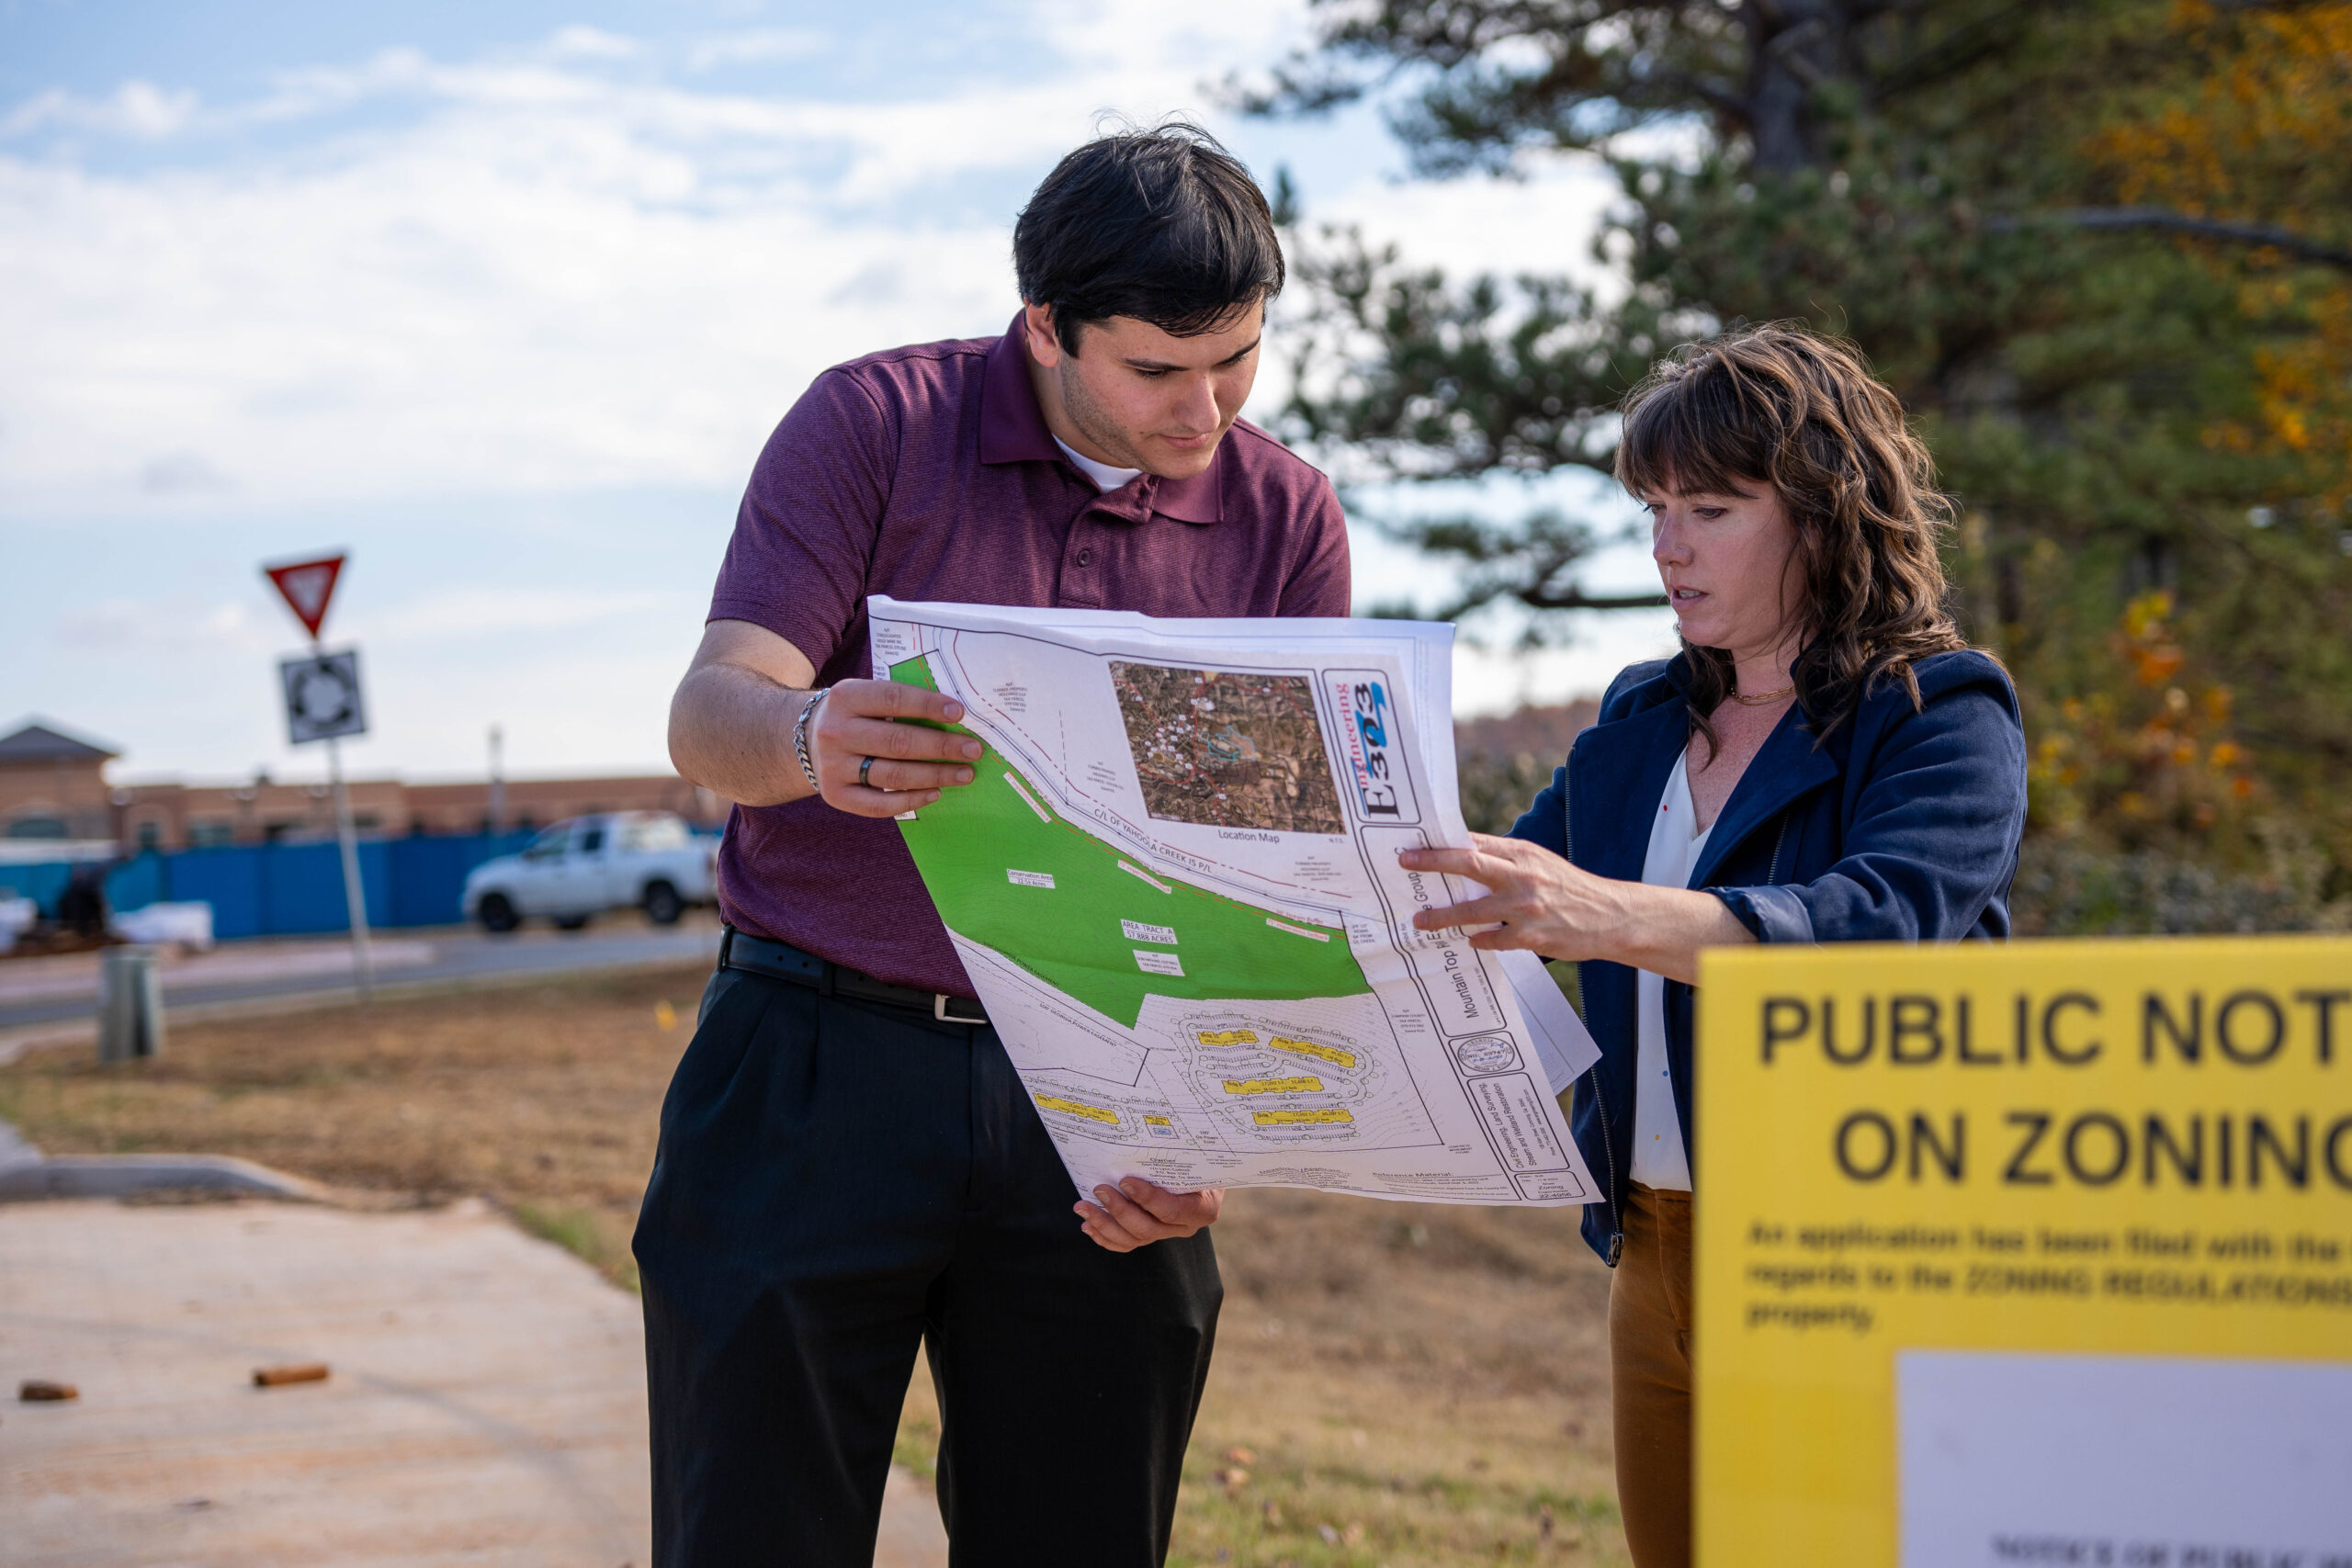 Man and woman examine municipal zoning plans next to a sign about zoning